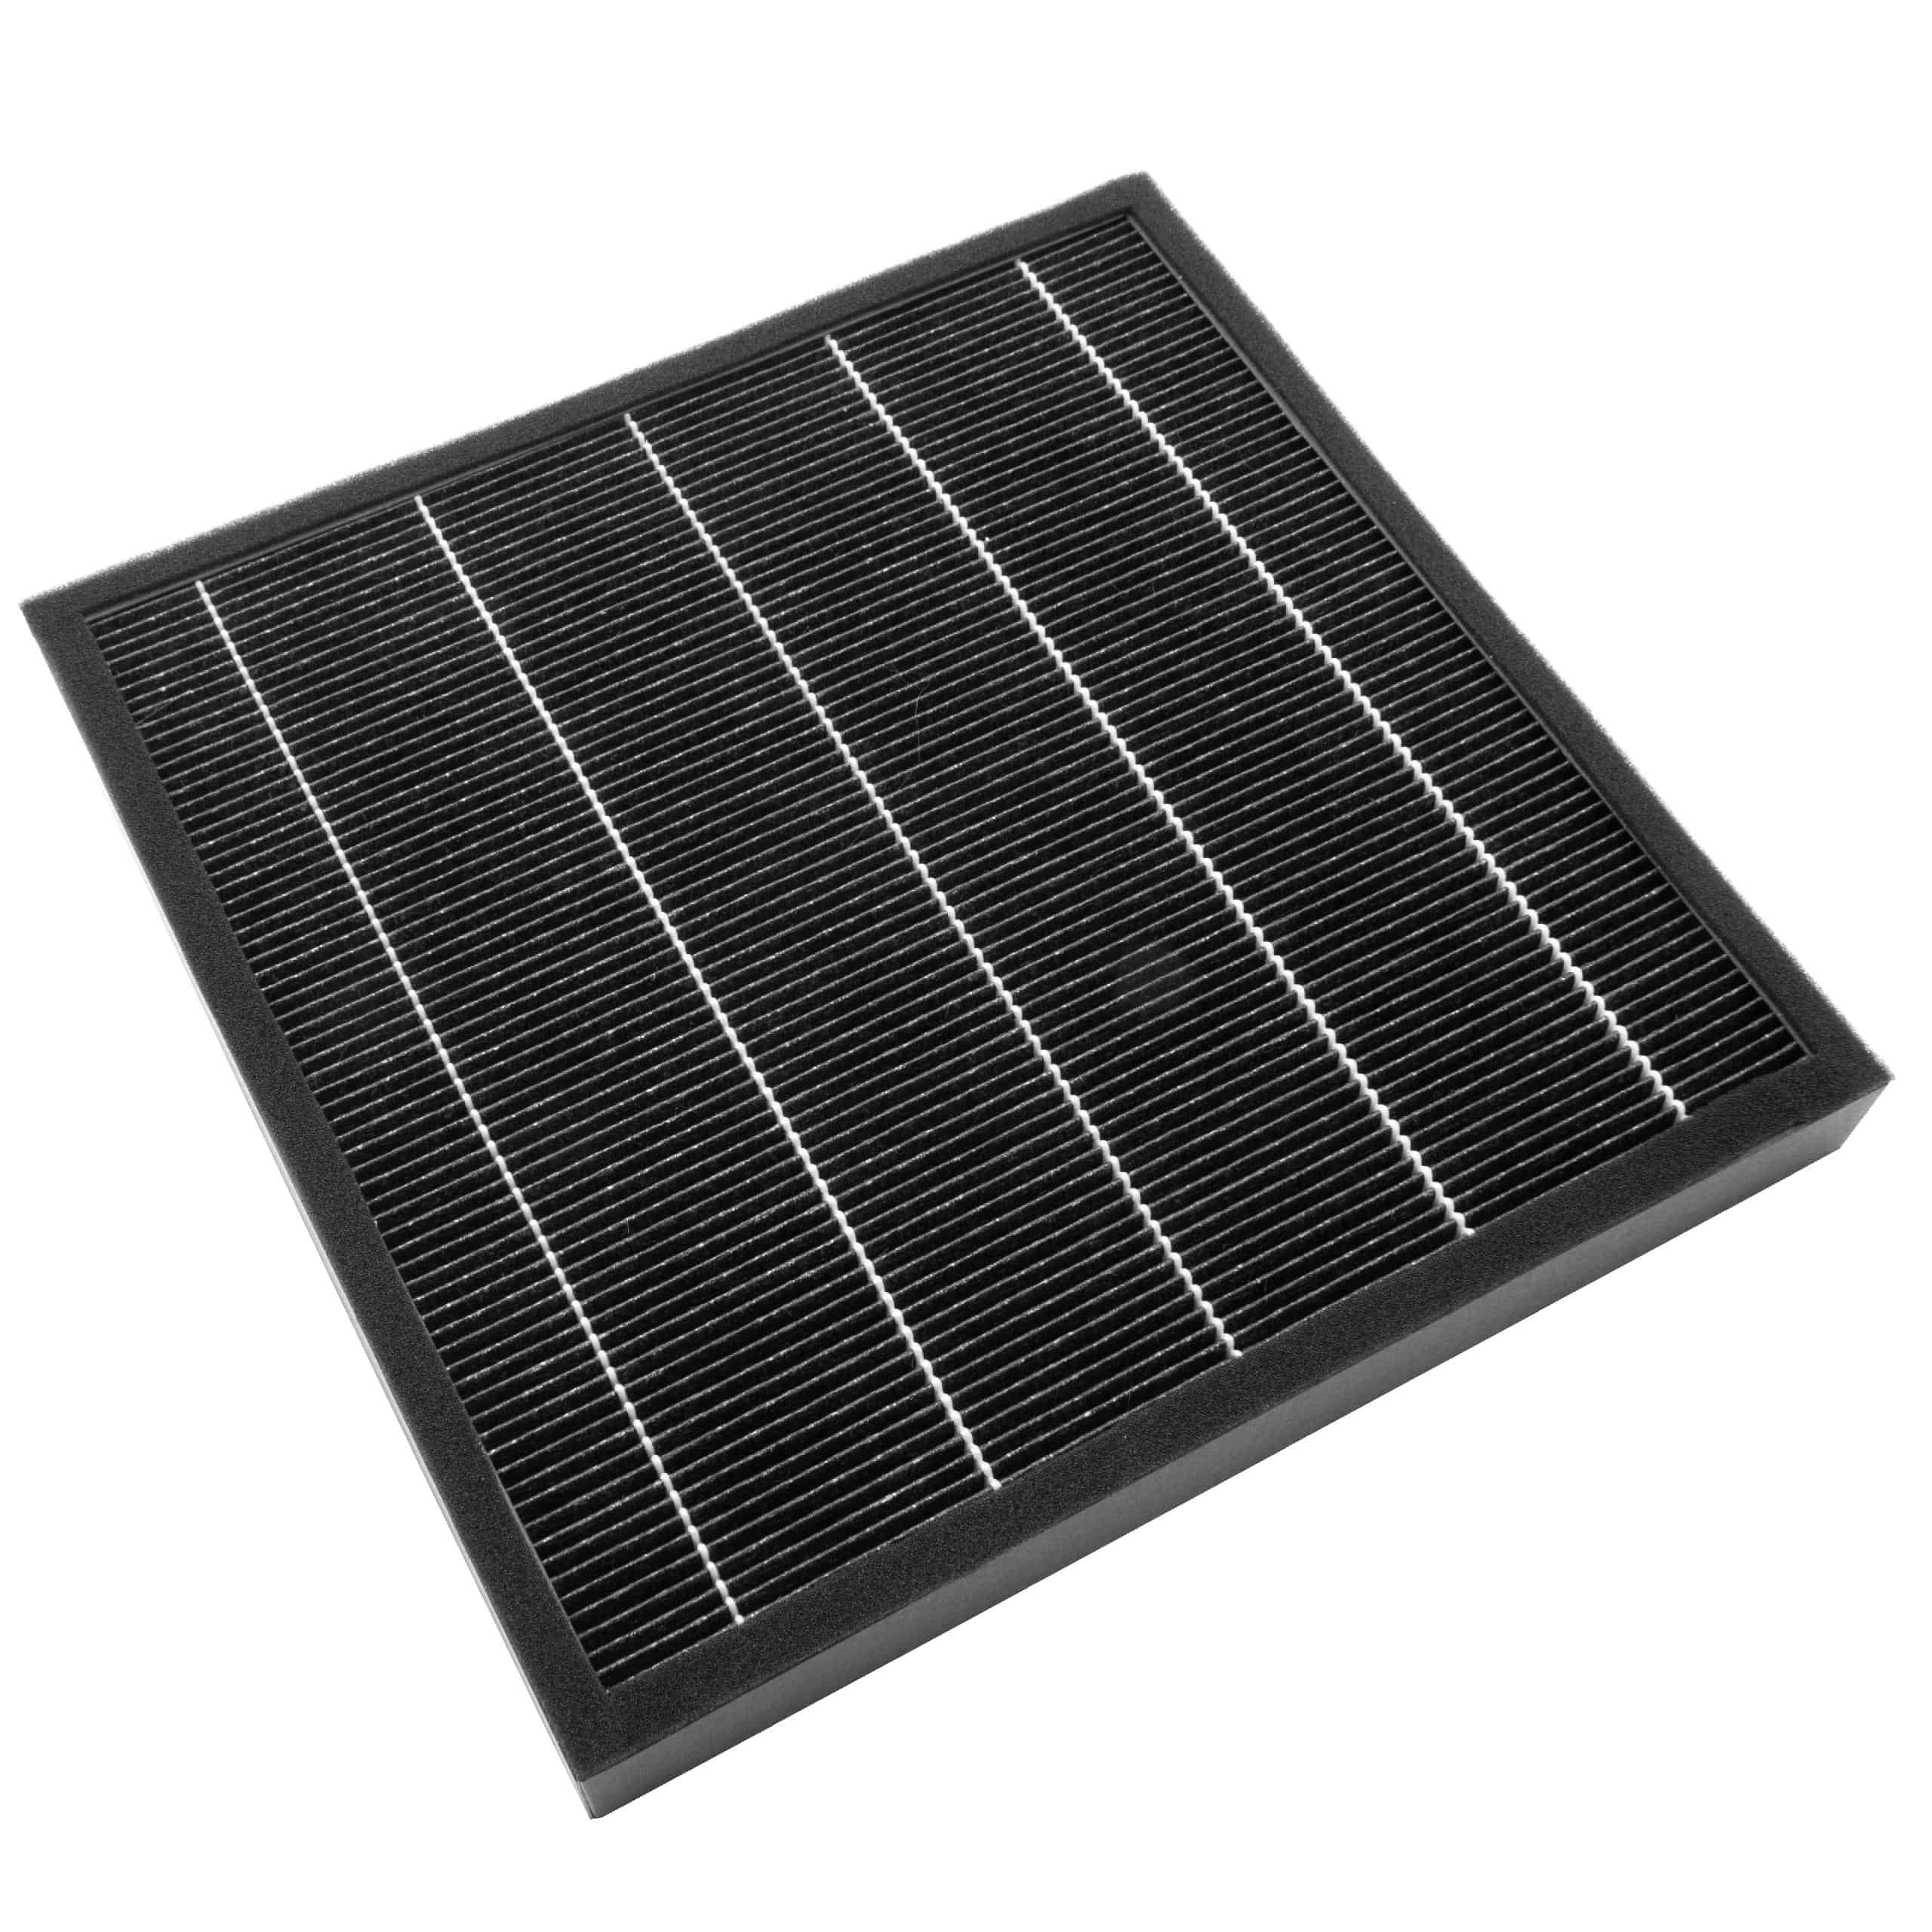 Filter as Replacement for Boneco A681 - HEPA (HEPA 13) + Activated Carbon, 28.0 x 27.8 x 3.2 cm